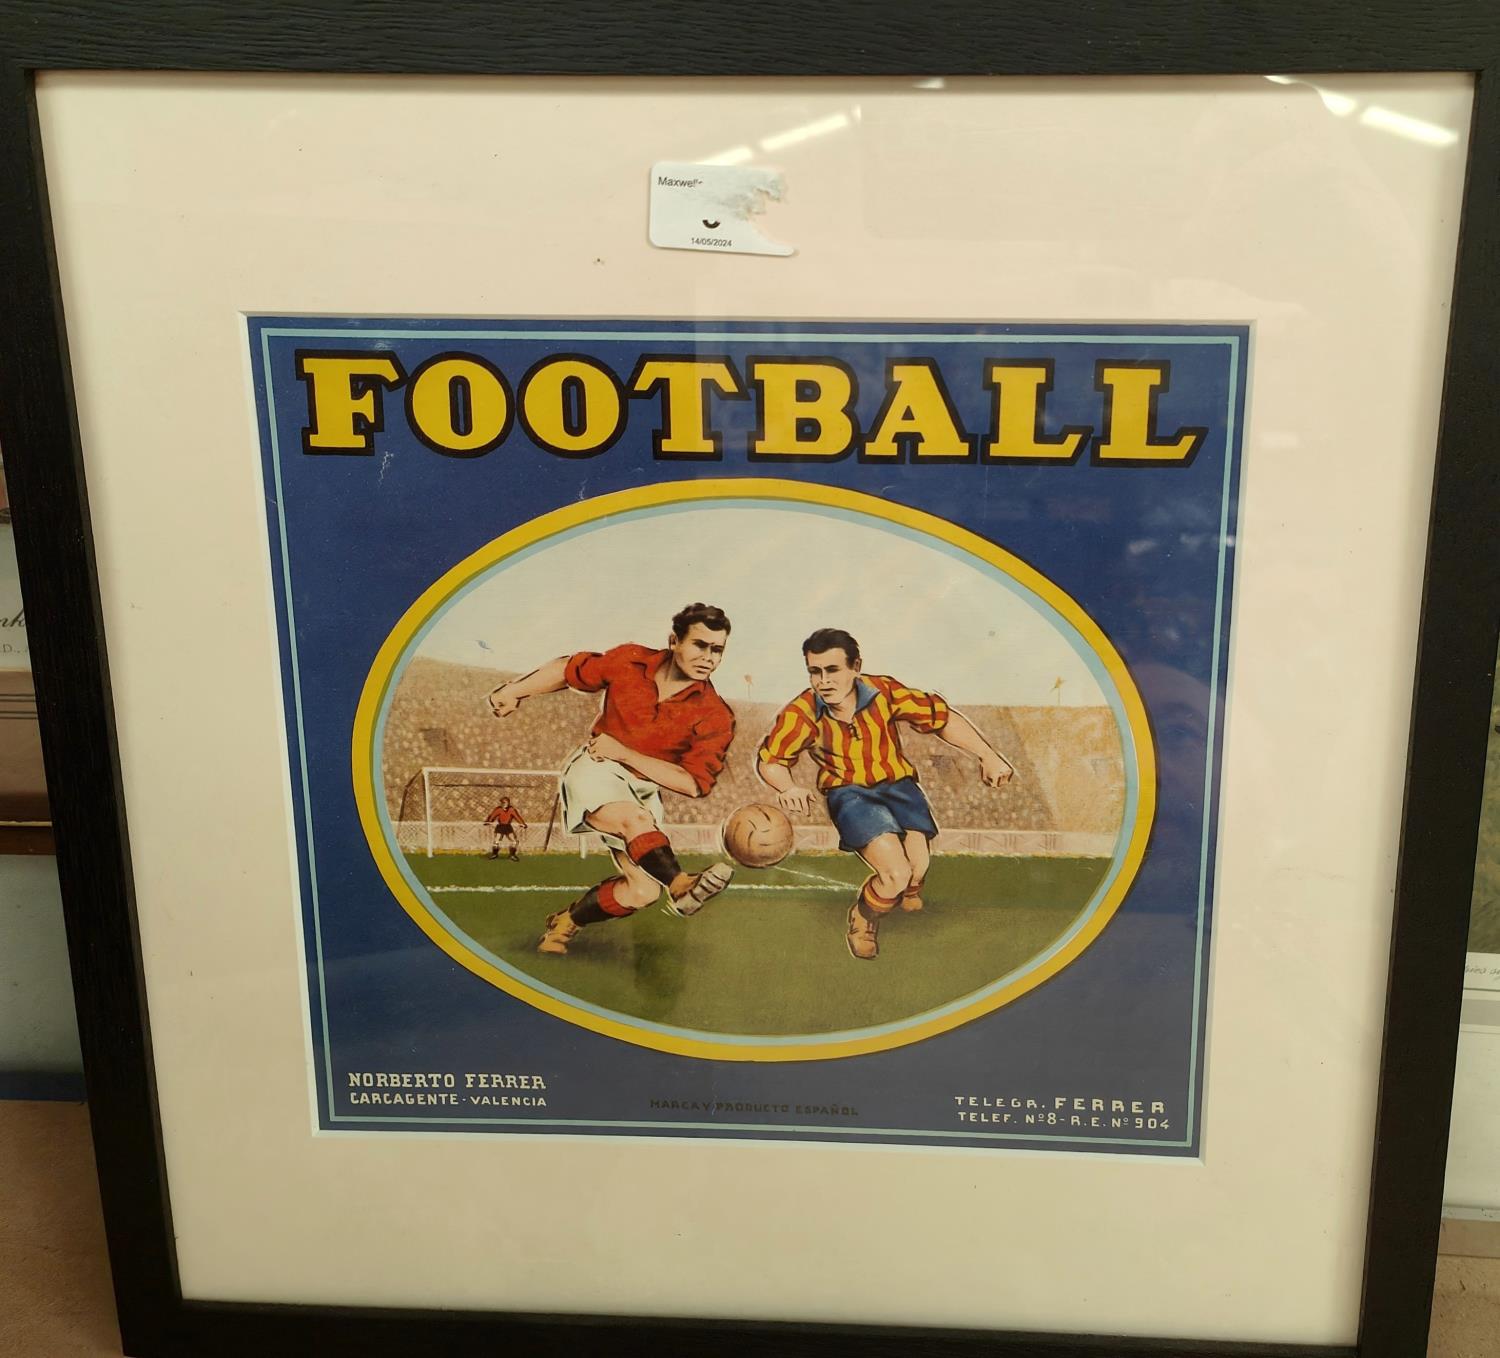 A vintage 1970's Liverpool football poster, a 1930's Football label and similar posters etc - Image 3 of 4